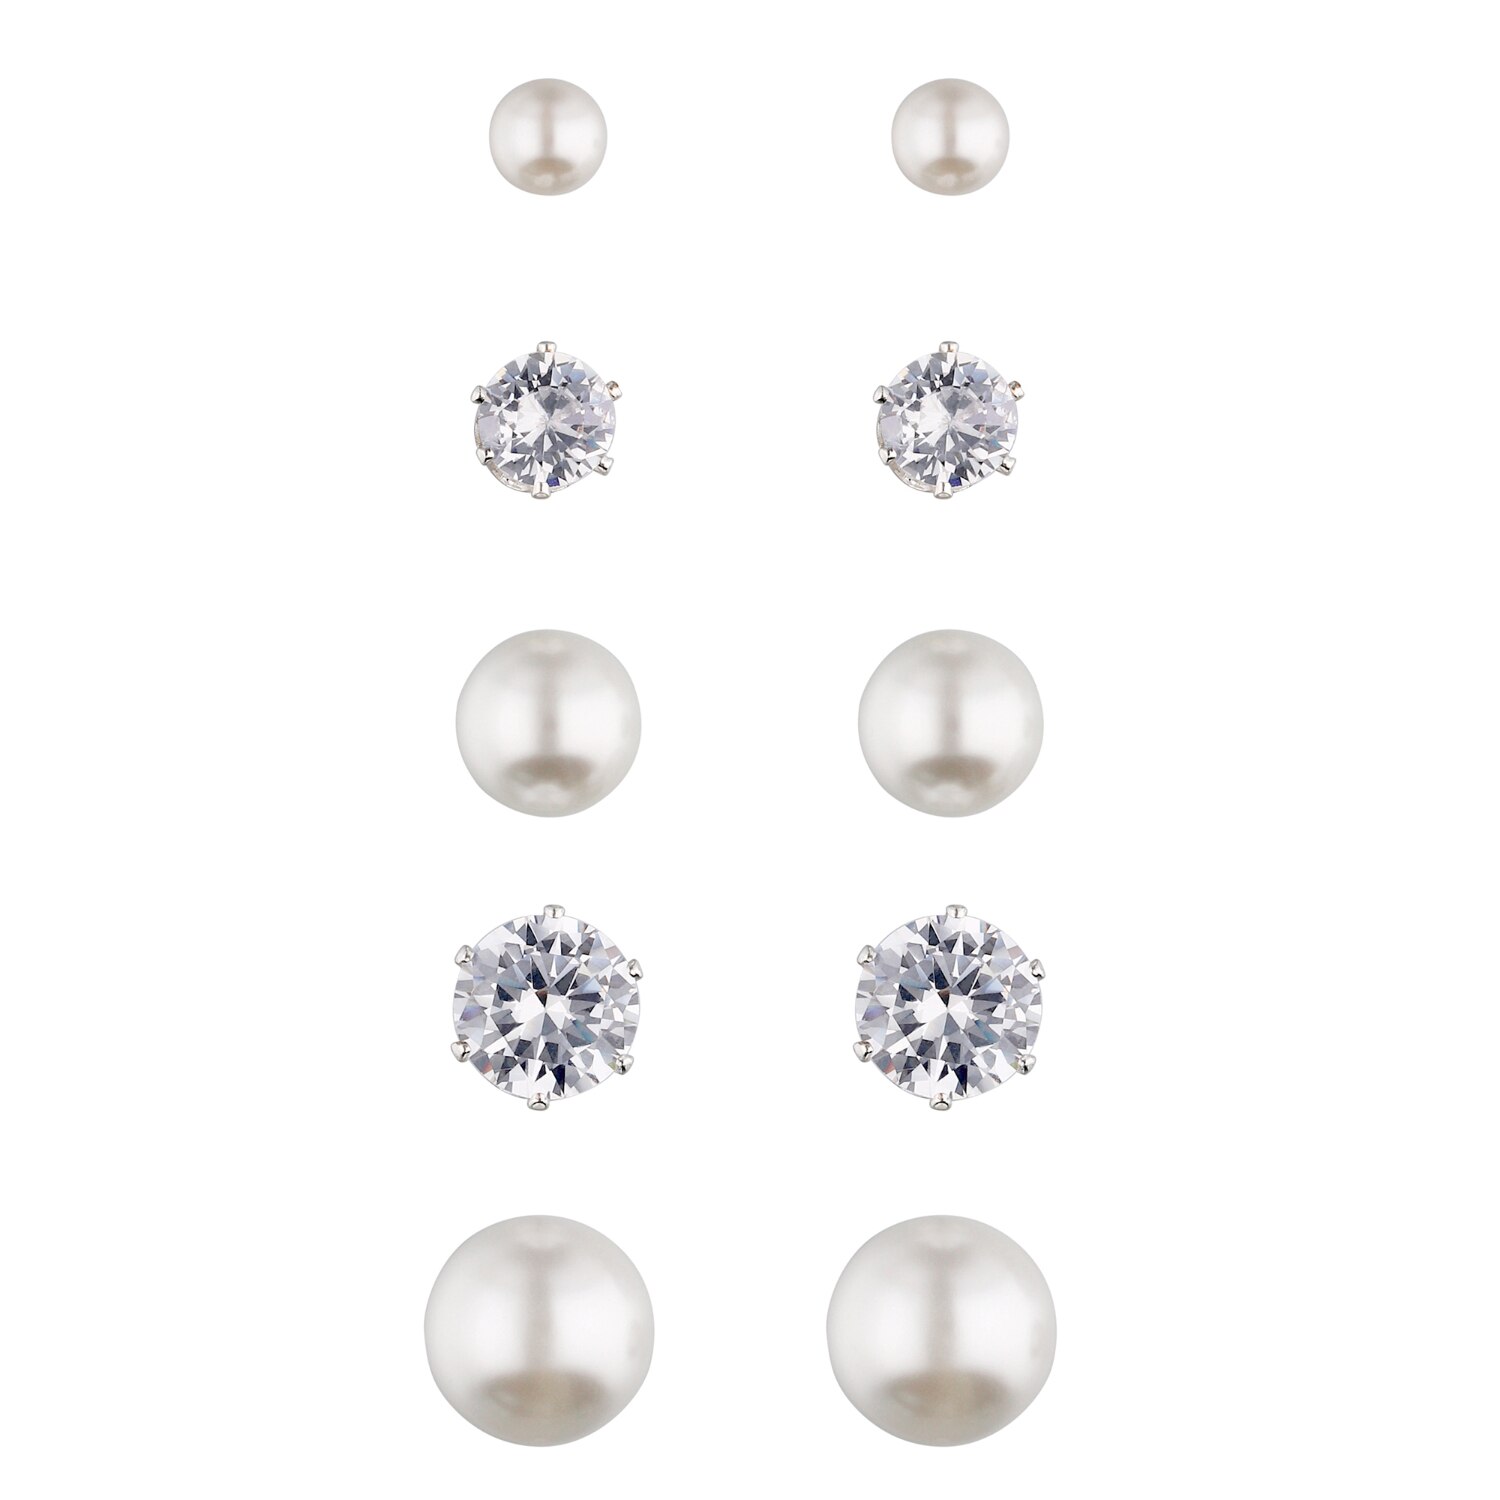 I AM Jewelry Pearl Silver Earring Set, 10CT